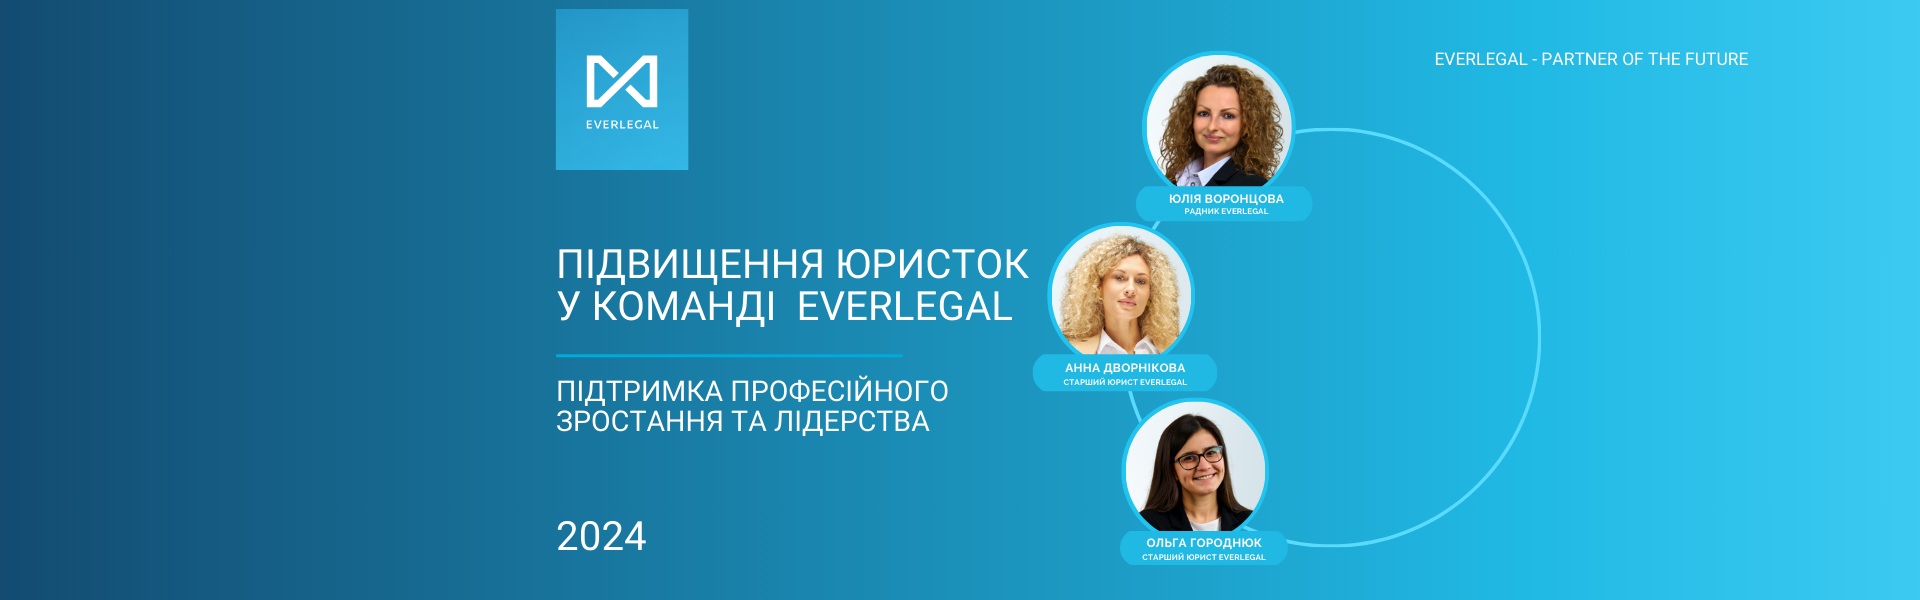 Promotion of lawyers in the EVERLEGAL team